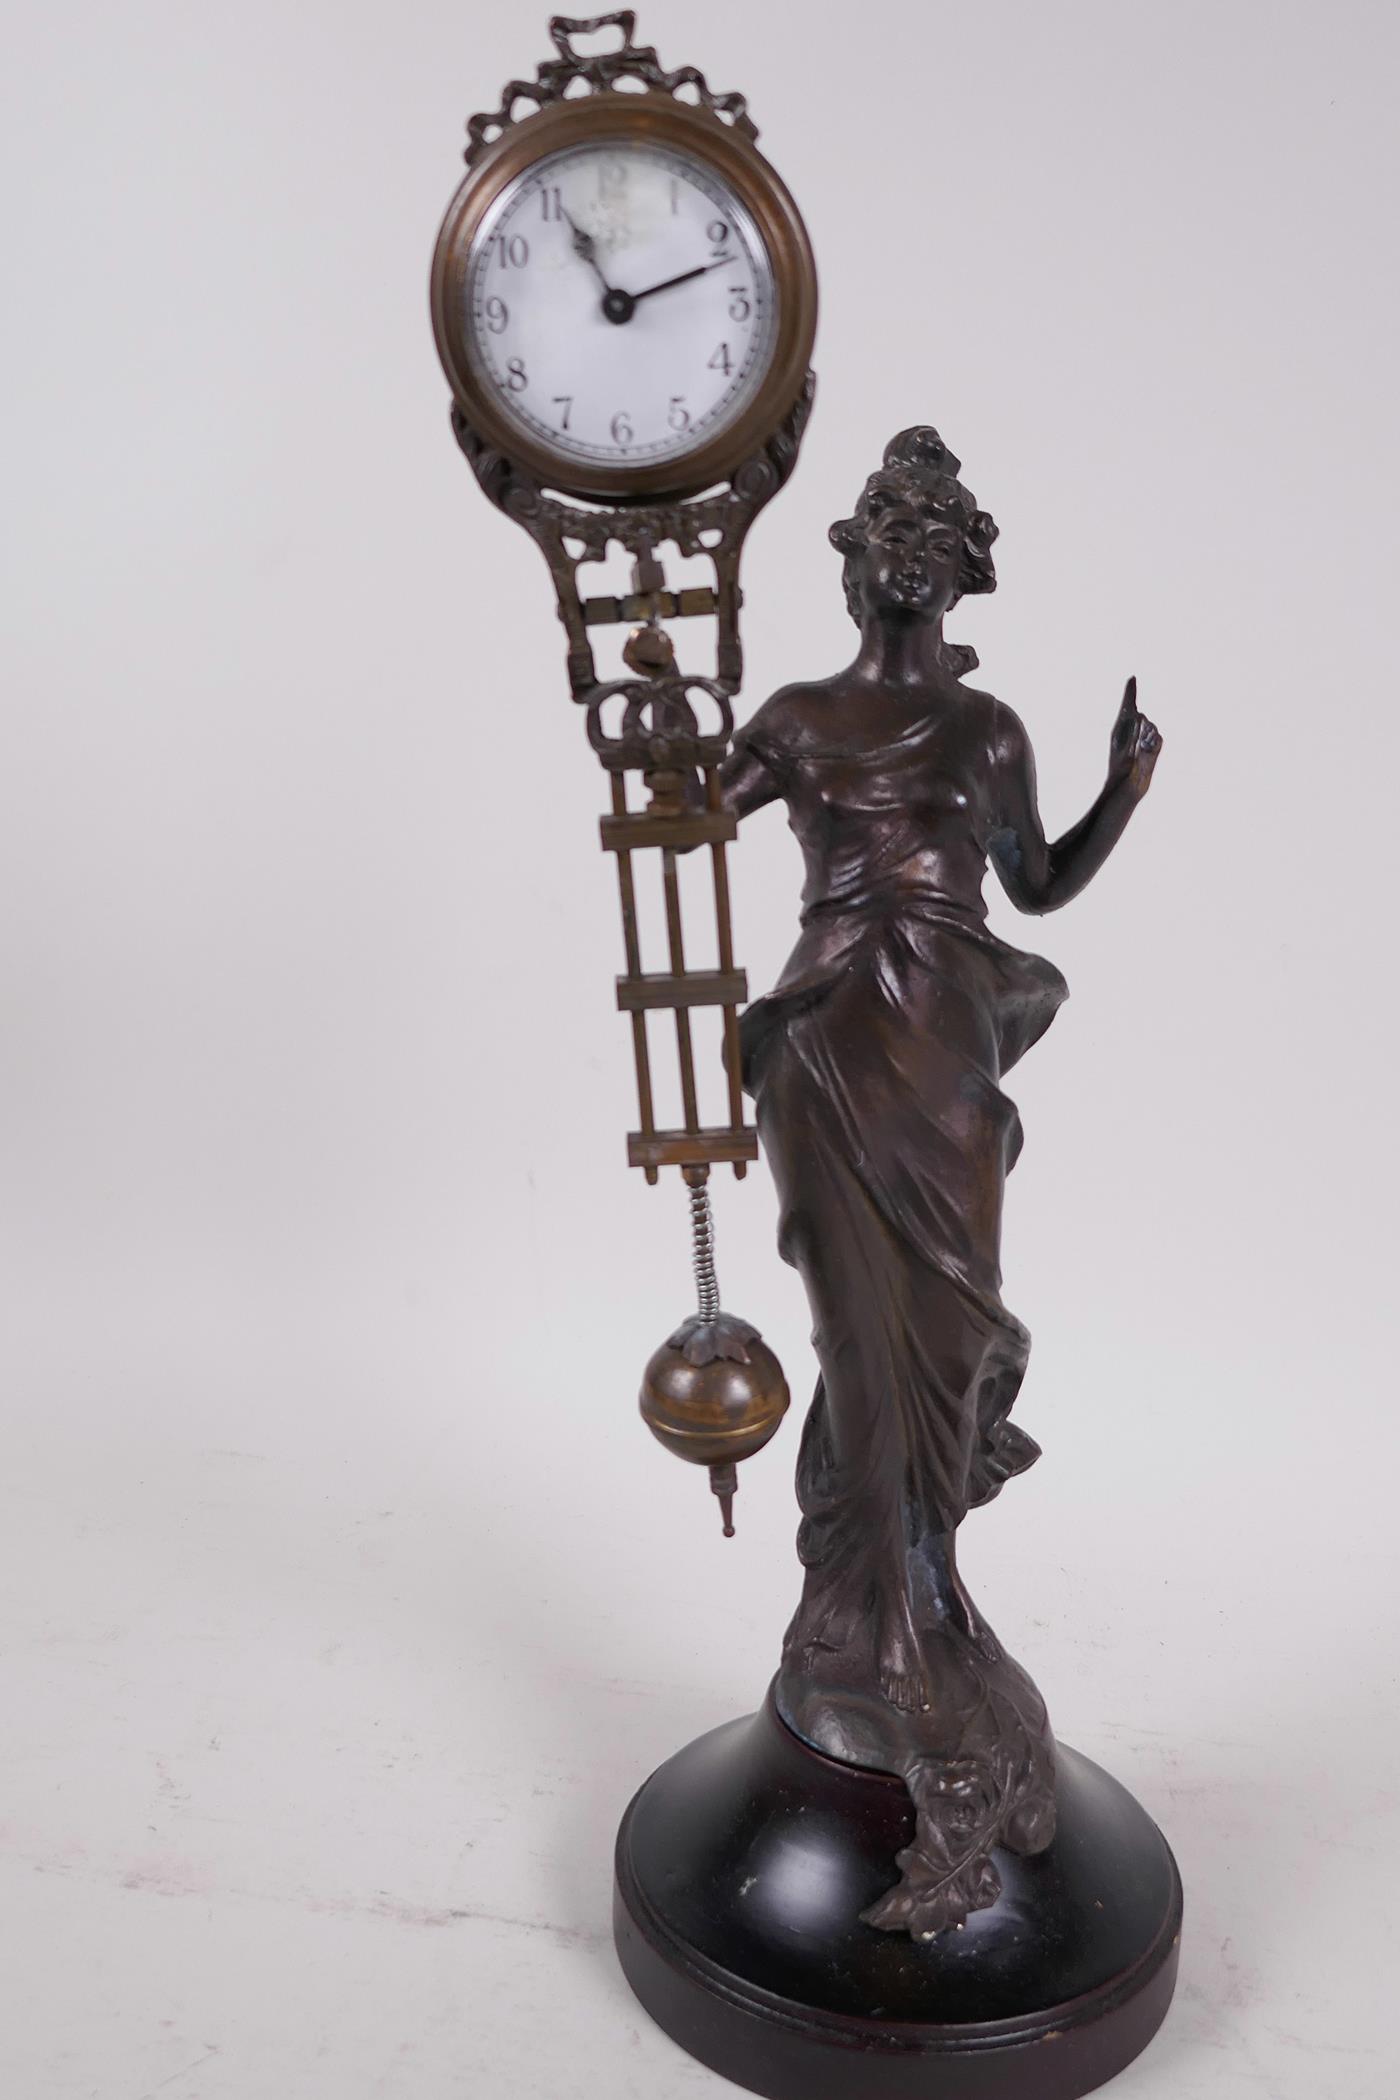 A bronze mystery clock cast as an Art Nouveau style lady with the clock raised on one arm, 13" high